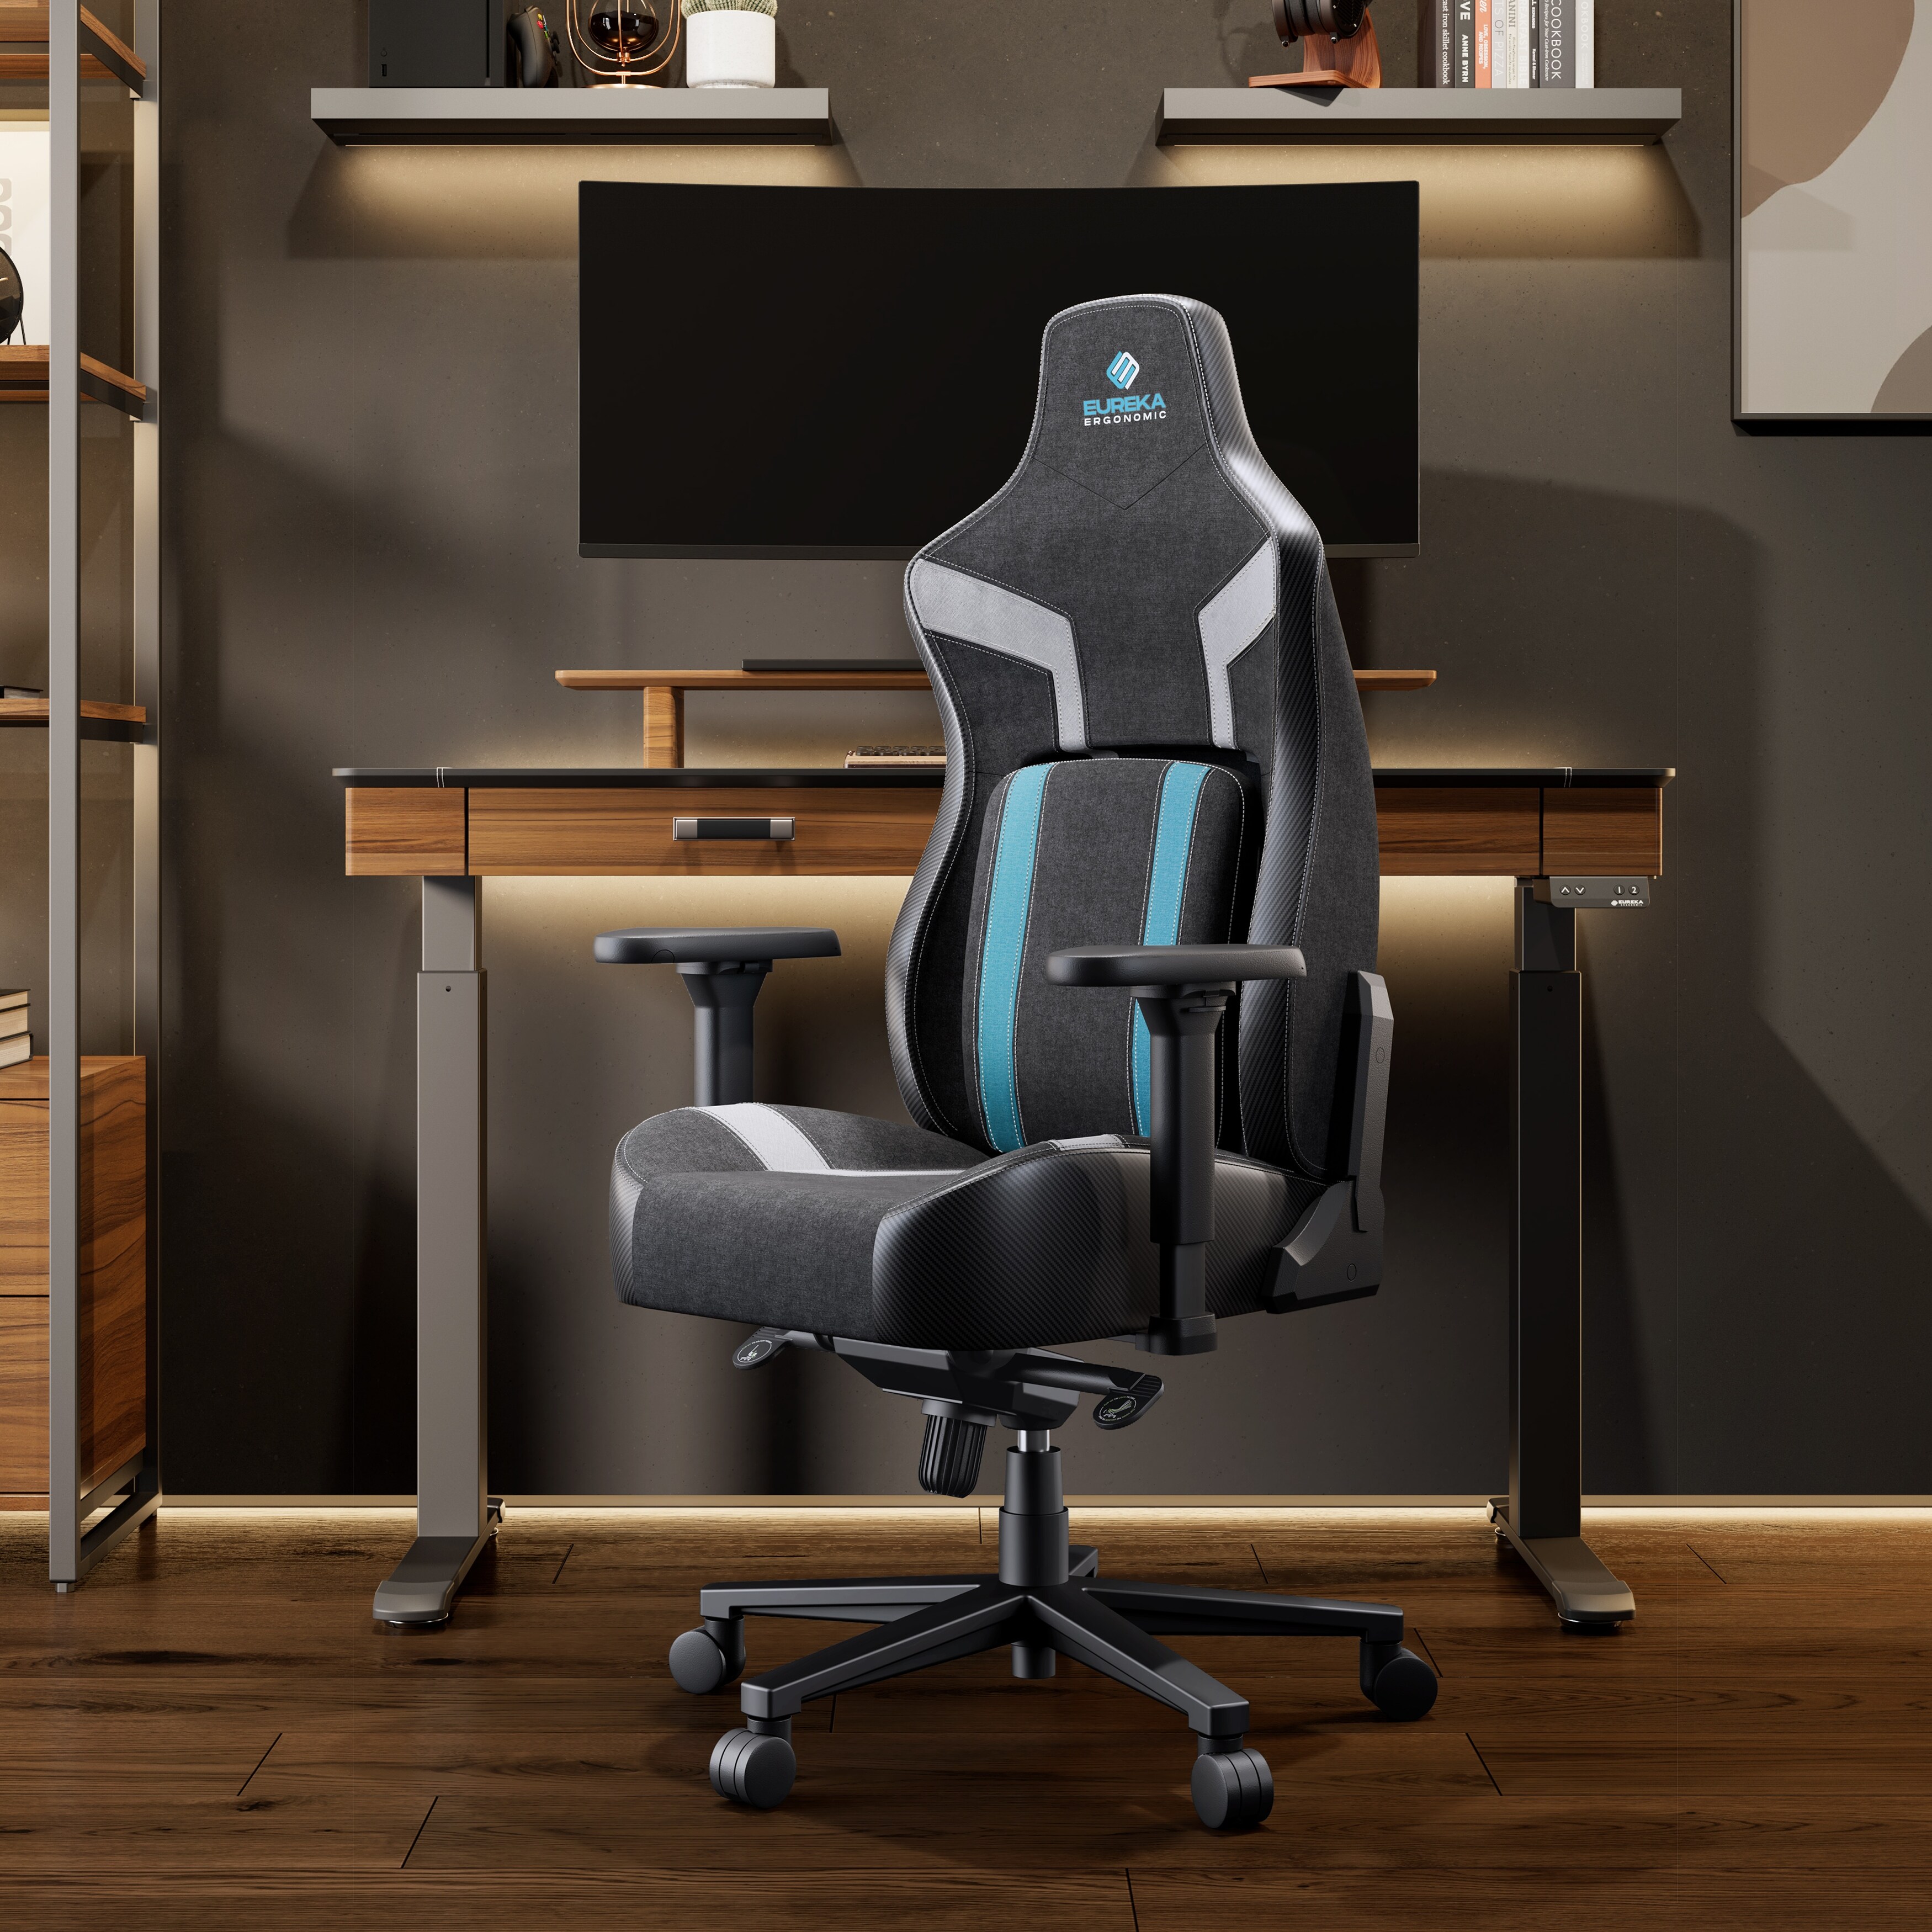 https://ak1.ostkcdn.com/images/products/is/images/direct/f7457c2d452a8c9b262ff21d5697f5fea7f85a6d/Eureka-Ergonomic-Gaming-Chair-Fabric-Home-Executive-Office-Chair-with-Lumbar-Support-%26-4D-Armrests.jpg